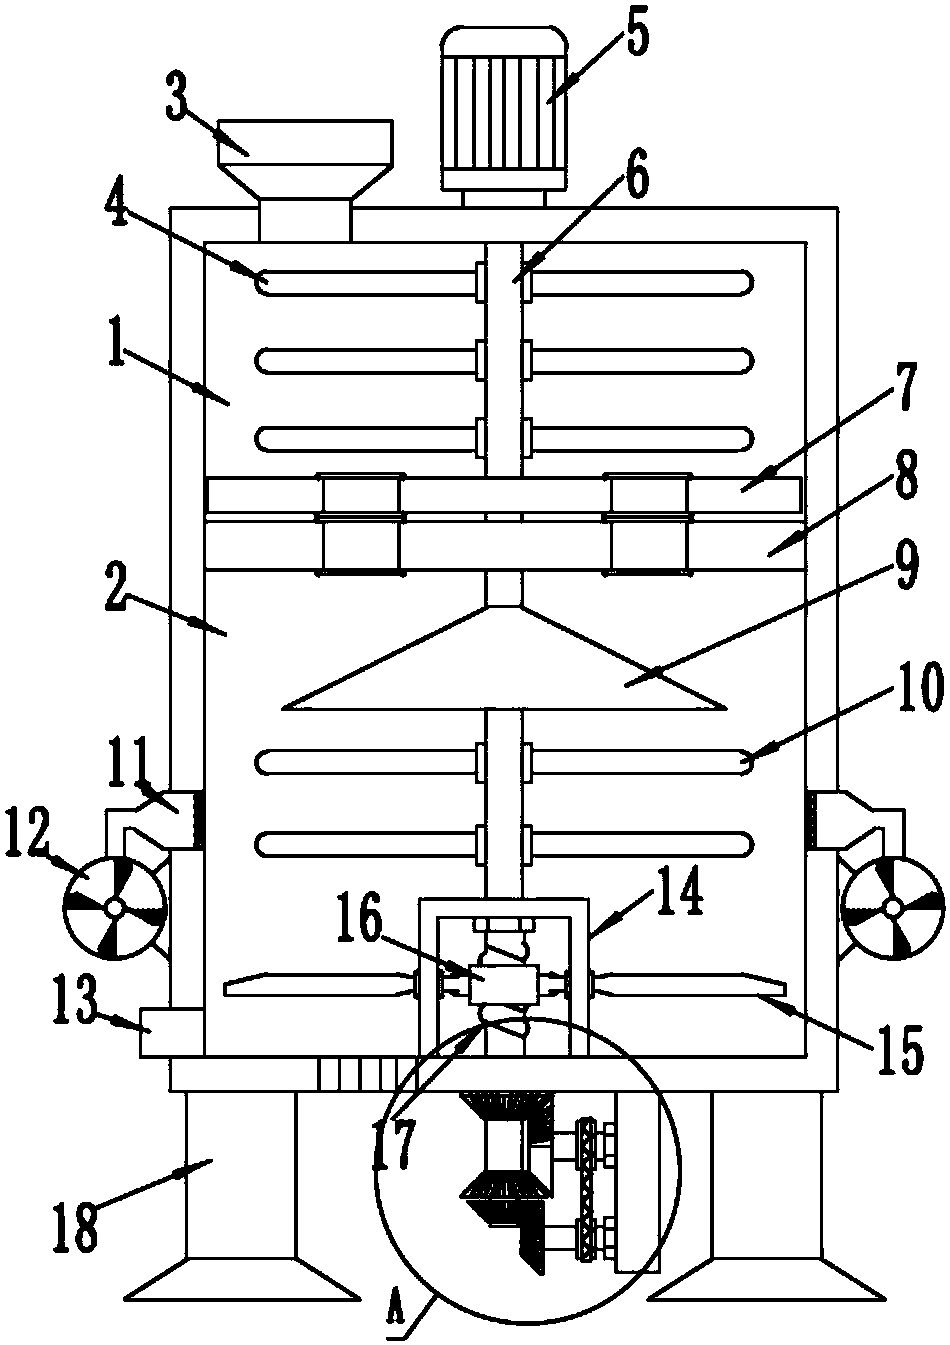 Grain drying device with intermittent feeding function